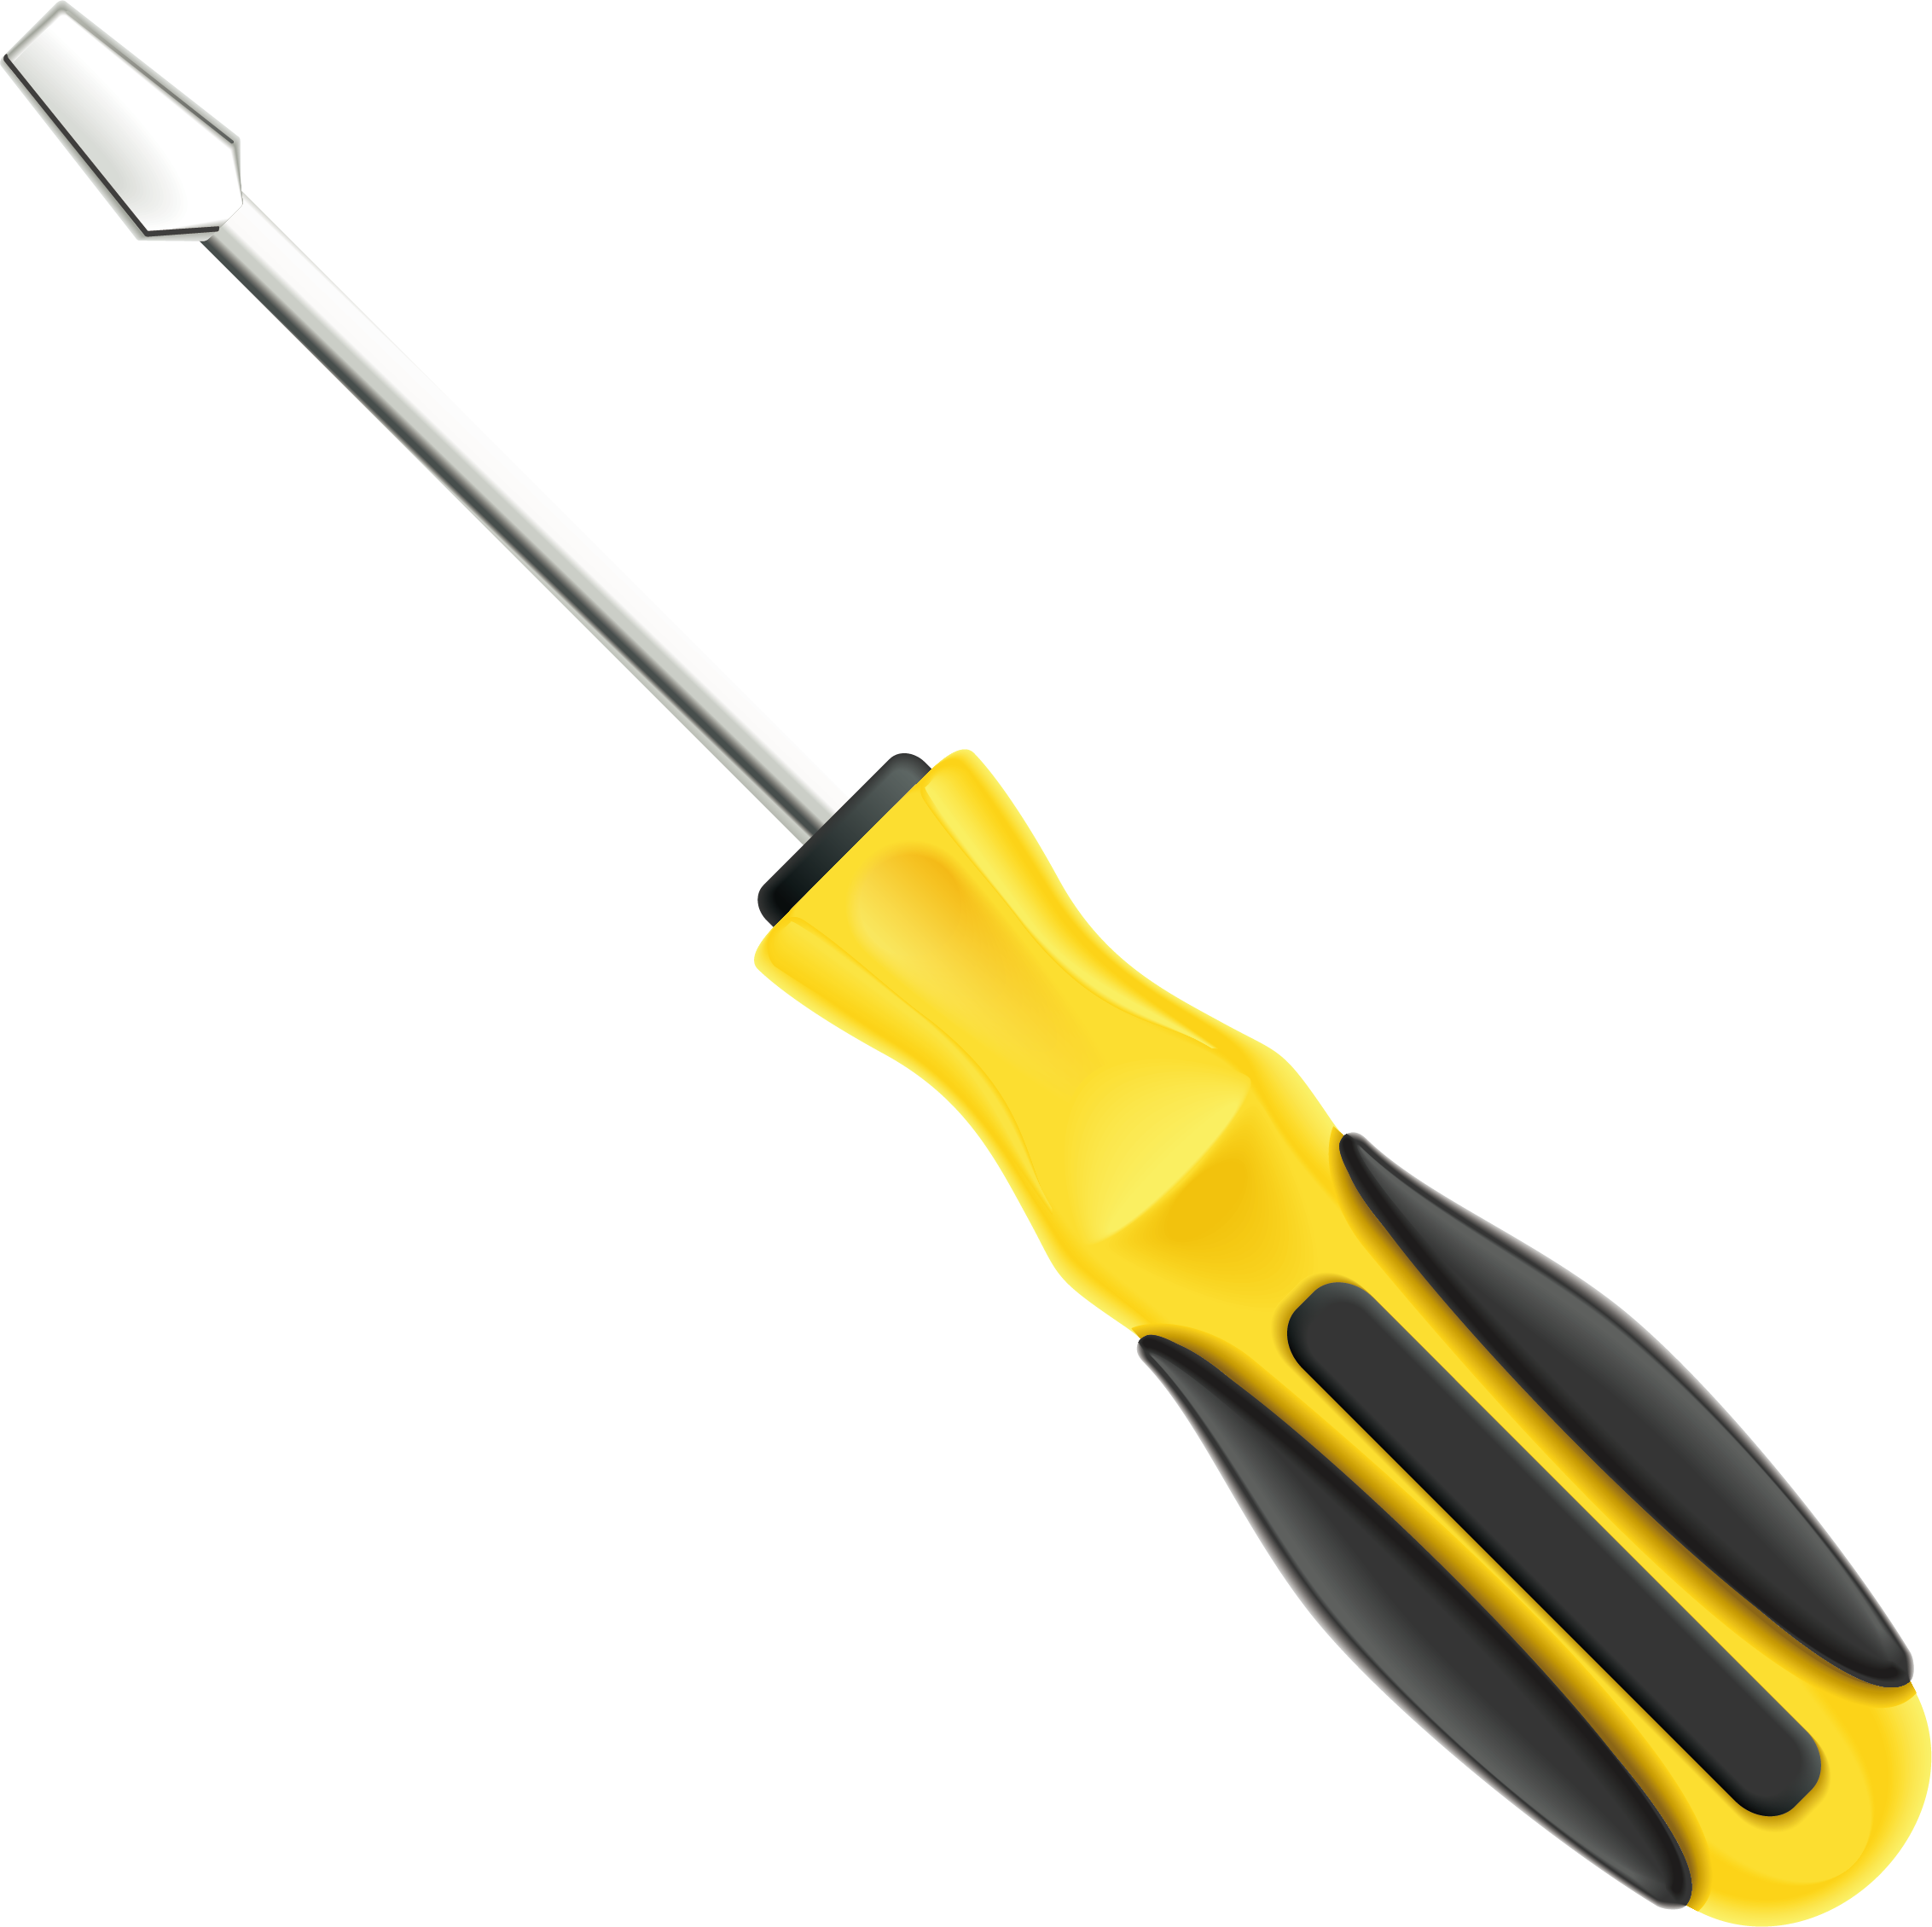 Screwdriver Transparent Isolated Images PNG